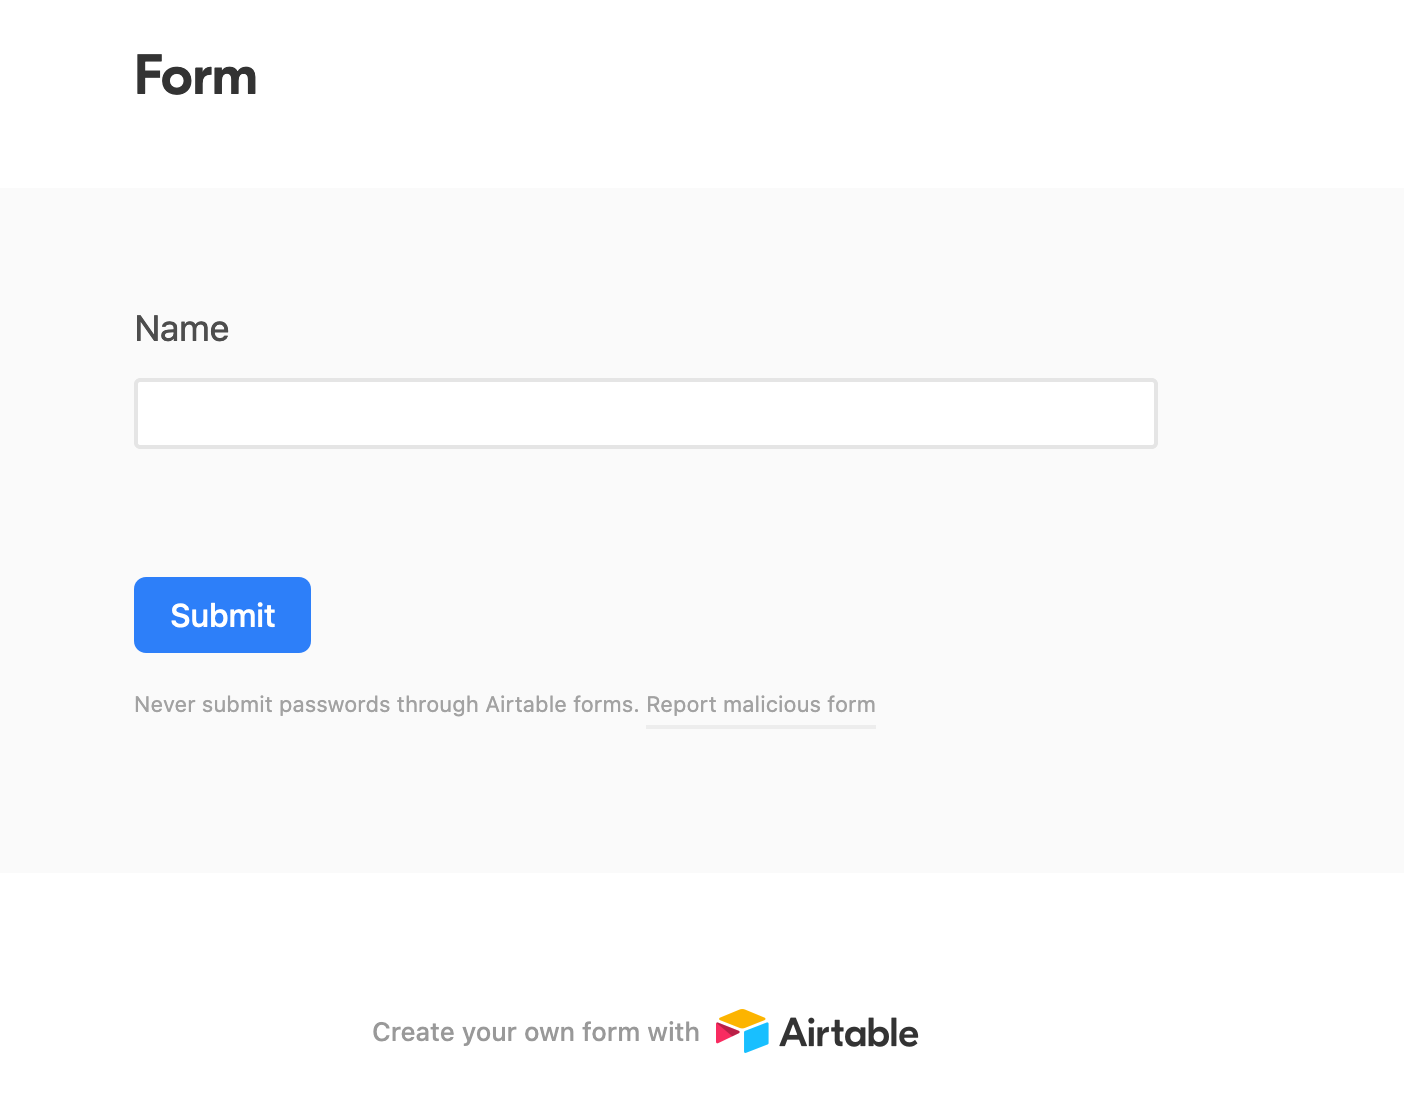 Notes using a form in Airtable